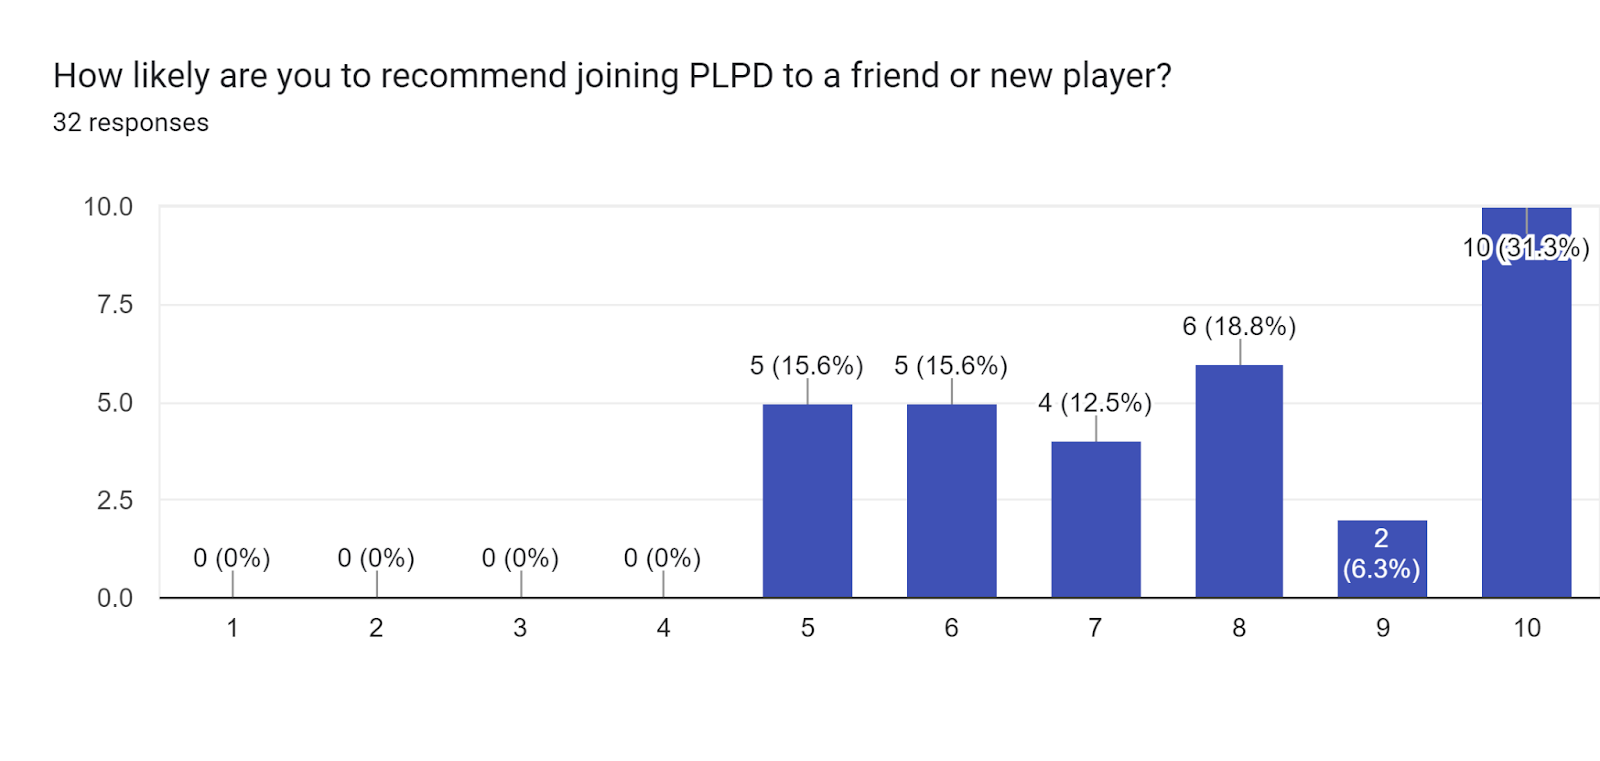 Forms response chart. Question title: How likely are you to recommend joining PLPD to a friend or new player?. Number of responses: 32 responses.